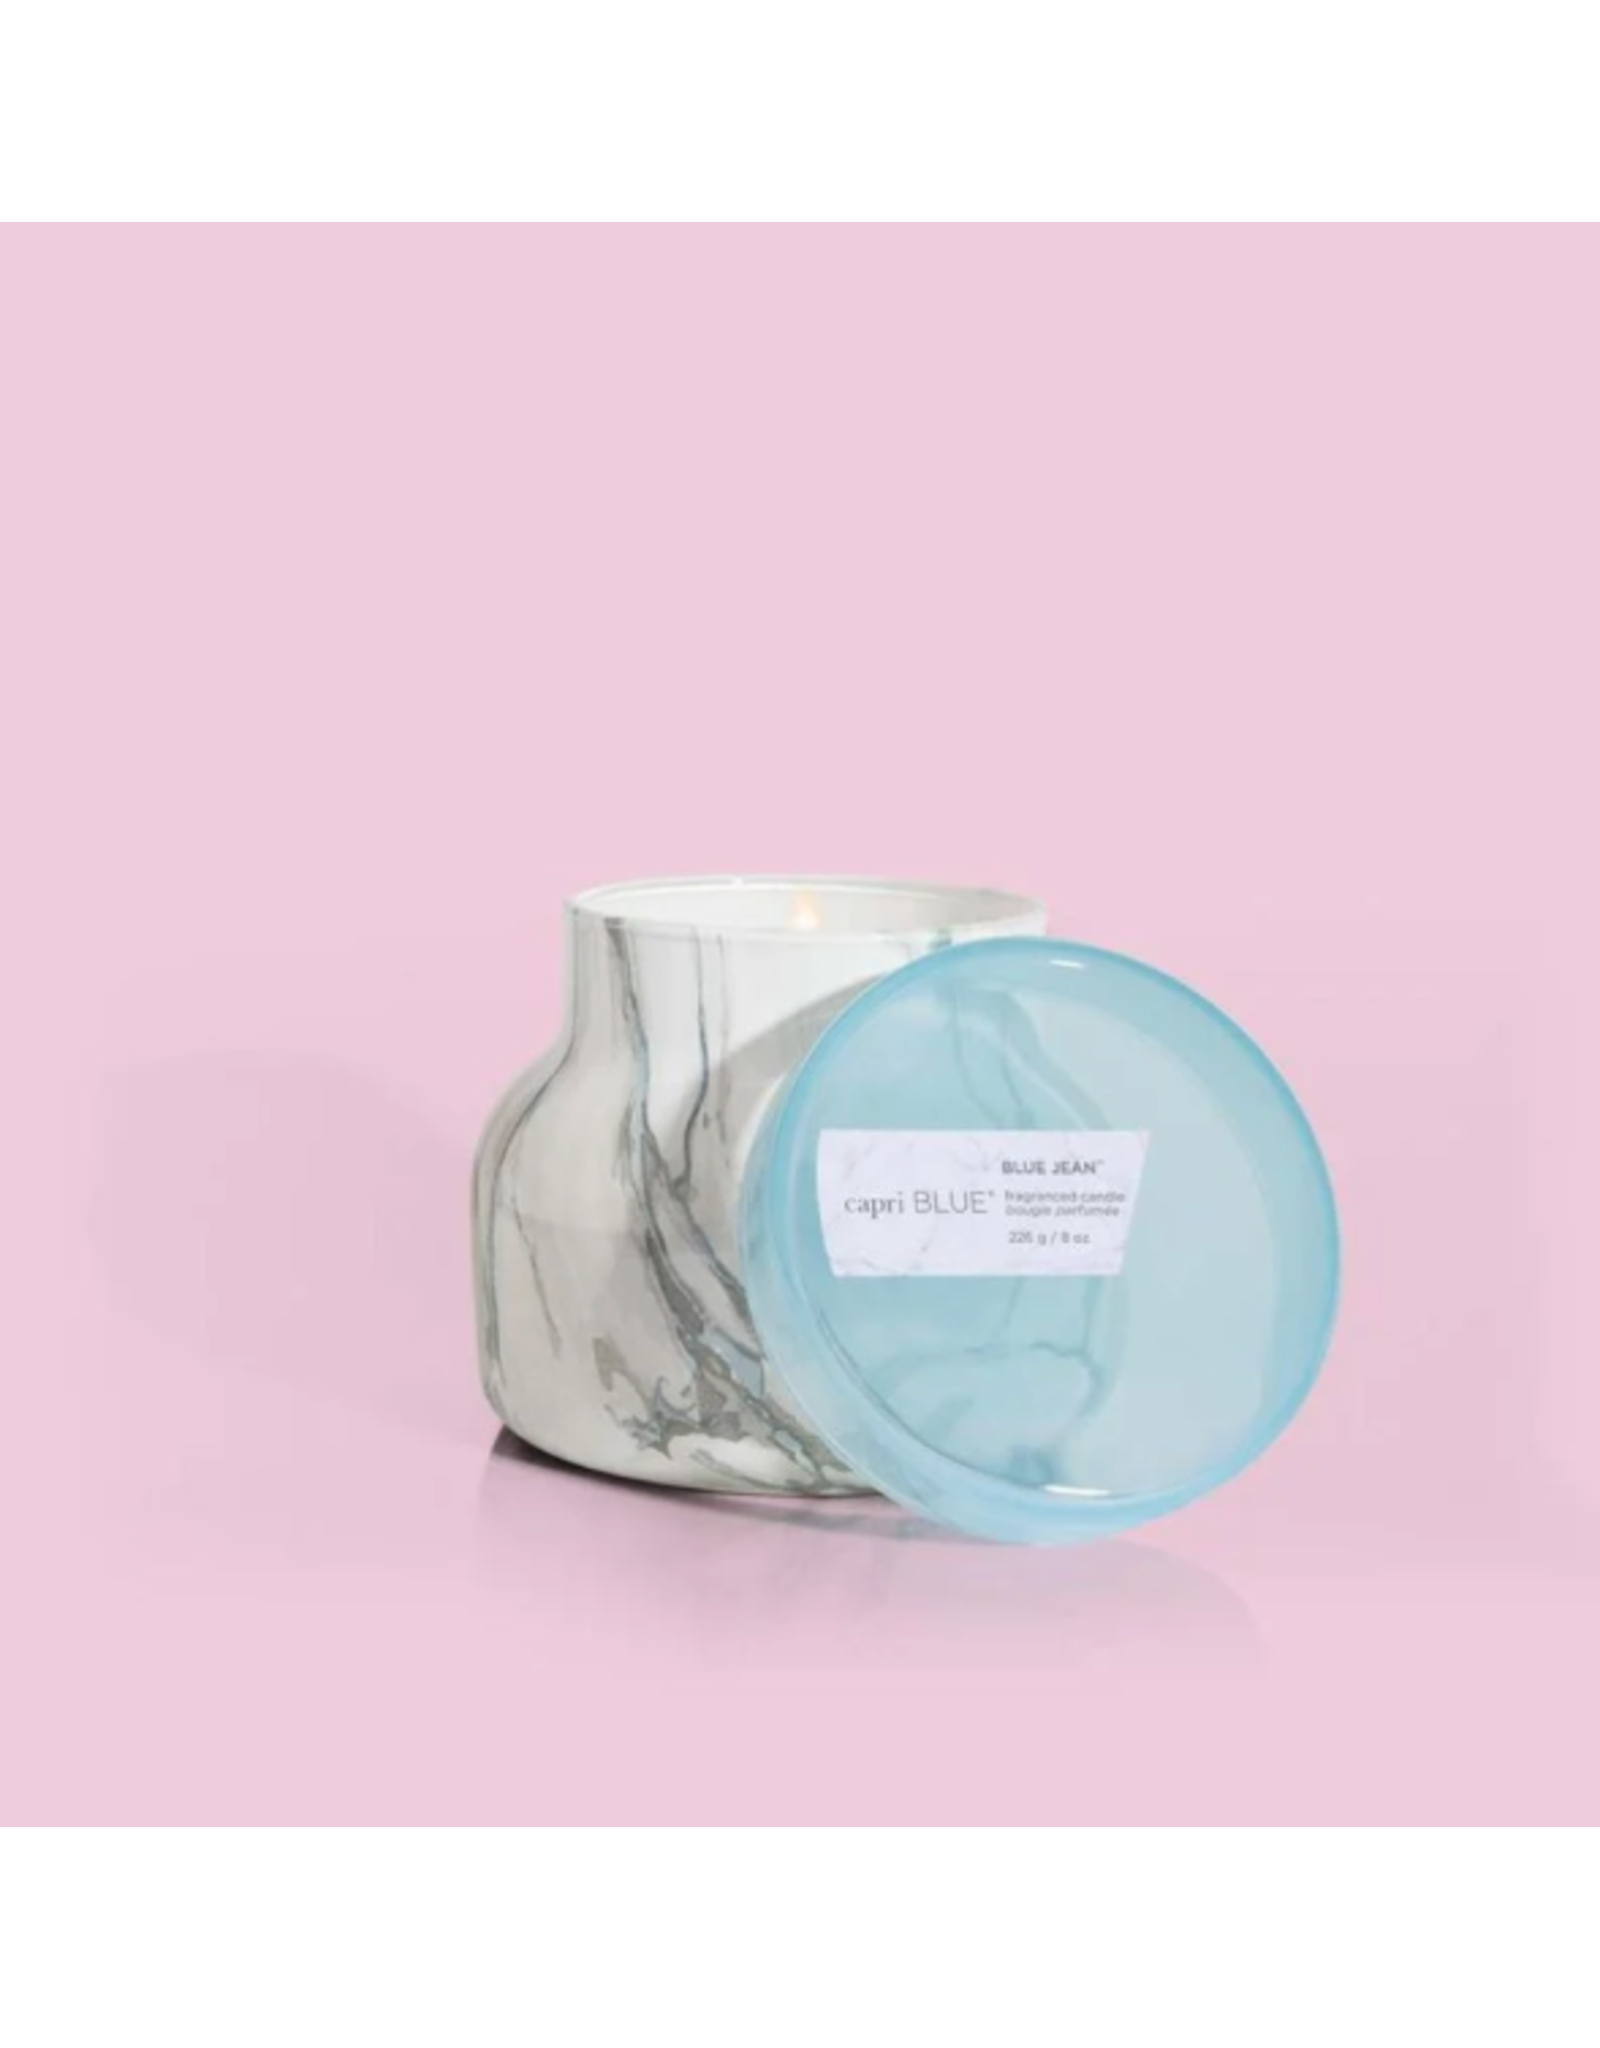 Candle 8 Mod Marble Blue Jean